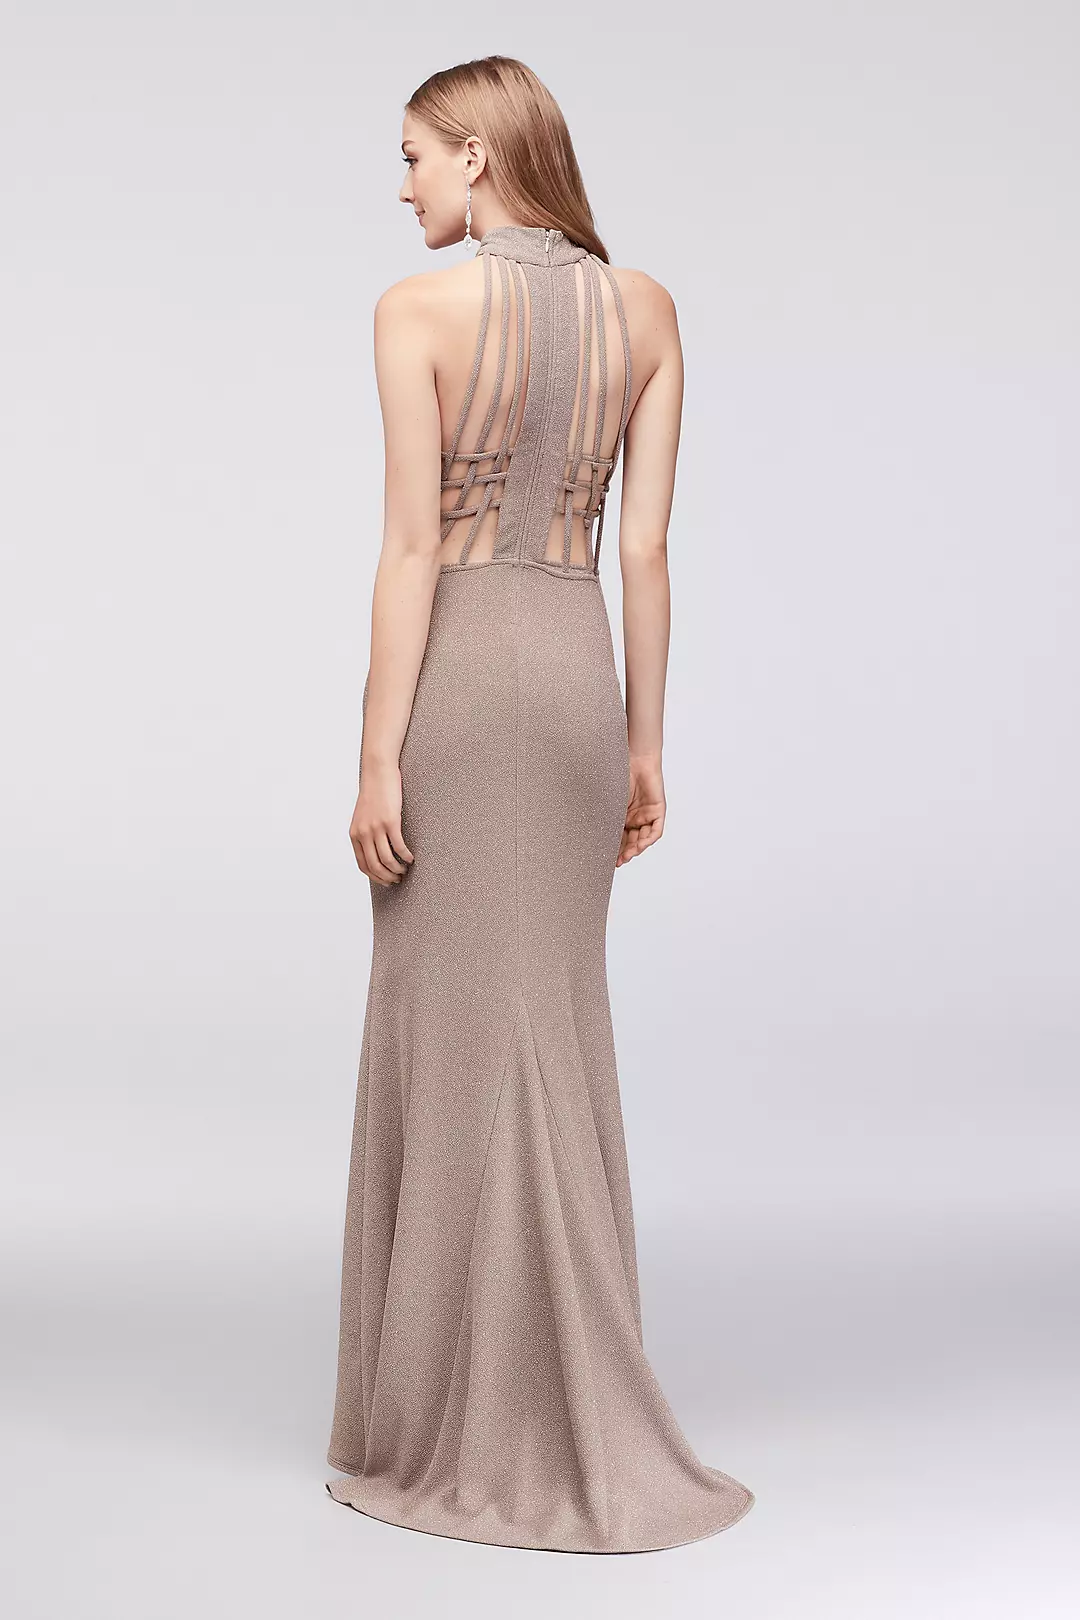 Textured Glitter Sheath Gown with Fishtail Hem Image 2